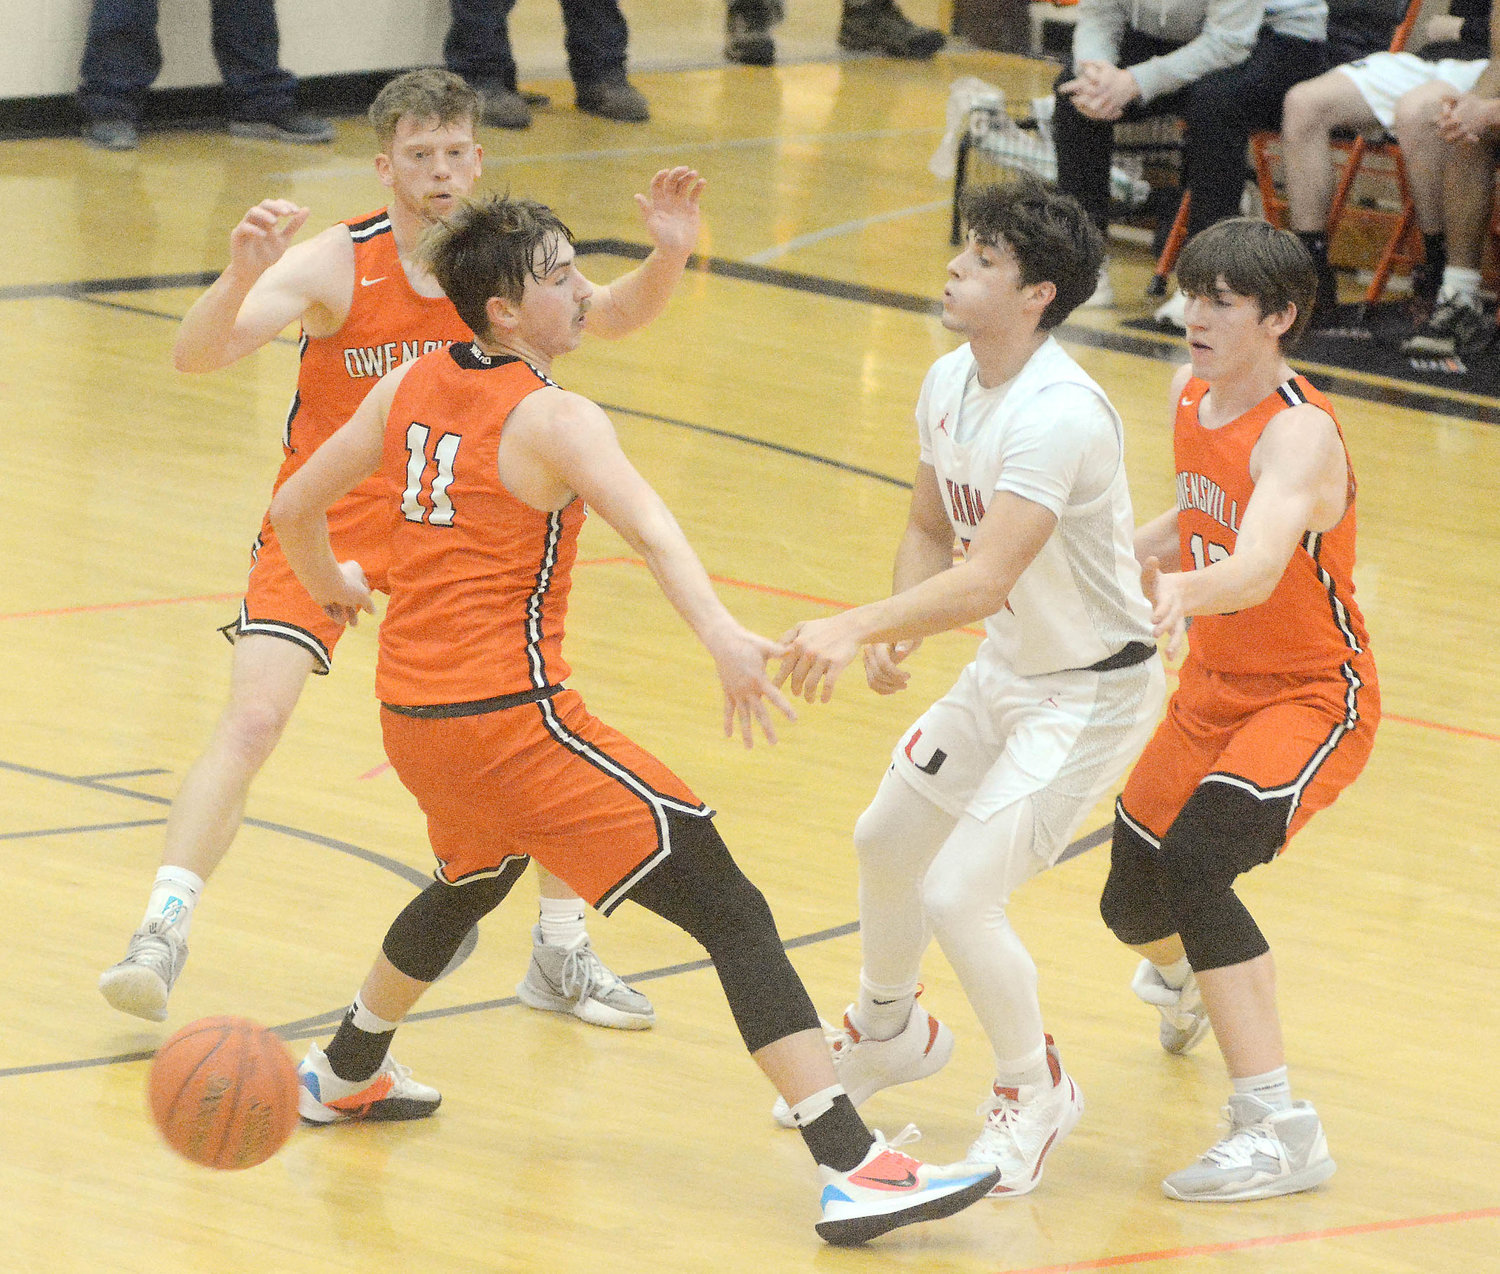 Bryce Payne, Charlie Whelan and Layne Evans (above, from left) surround Union’s Ryan Rapert just as the Wildcat guard passes the ball during first-round action Monday night during first-round action from the 34th Owensville Varsity Boys Basketball Tournament at Owensville High School. Games continued last night (Tuesday) with semifinal action set for Thursday and all four place games on Friday beginning at 4 p.m.